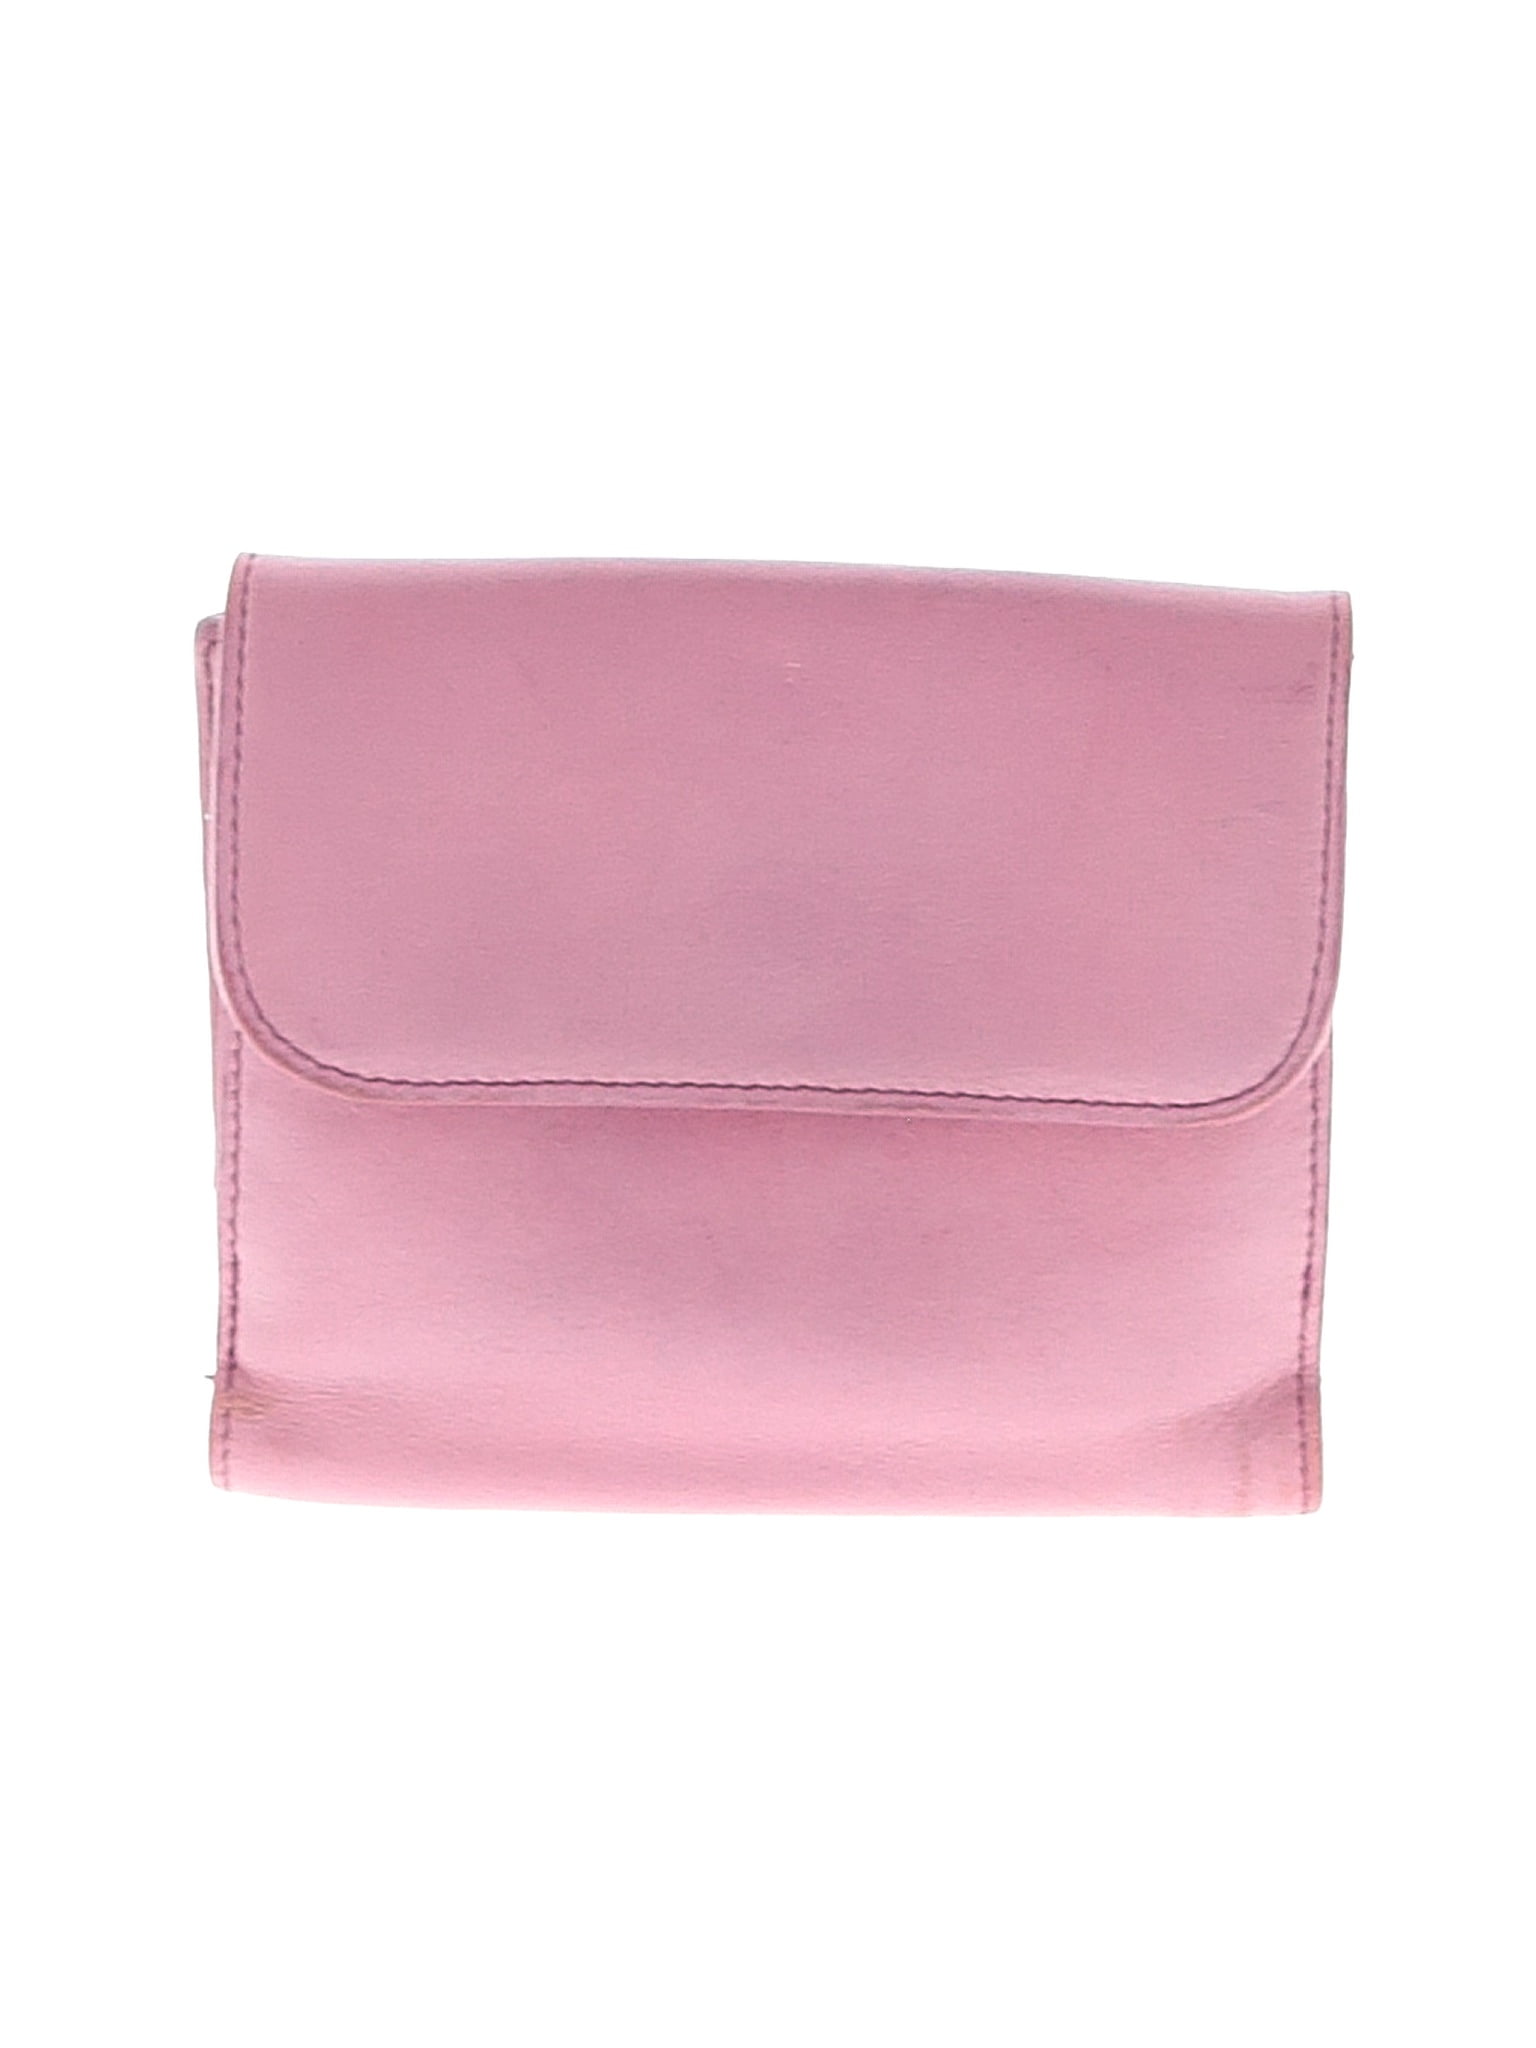 Nordstrom 100% Leather Solid Pink Leather Wallet One Size - 71% off ...